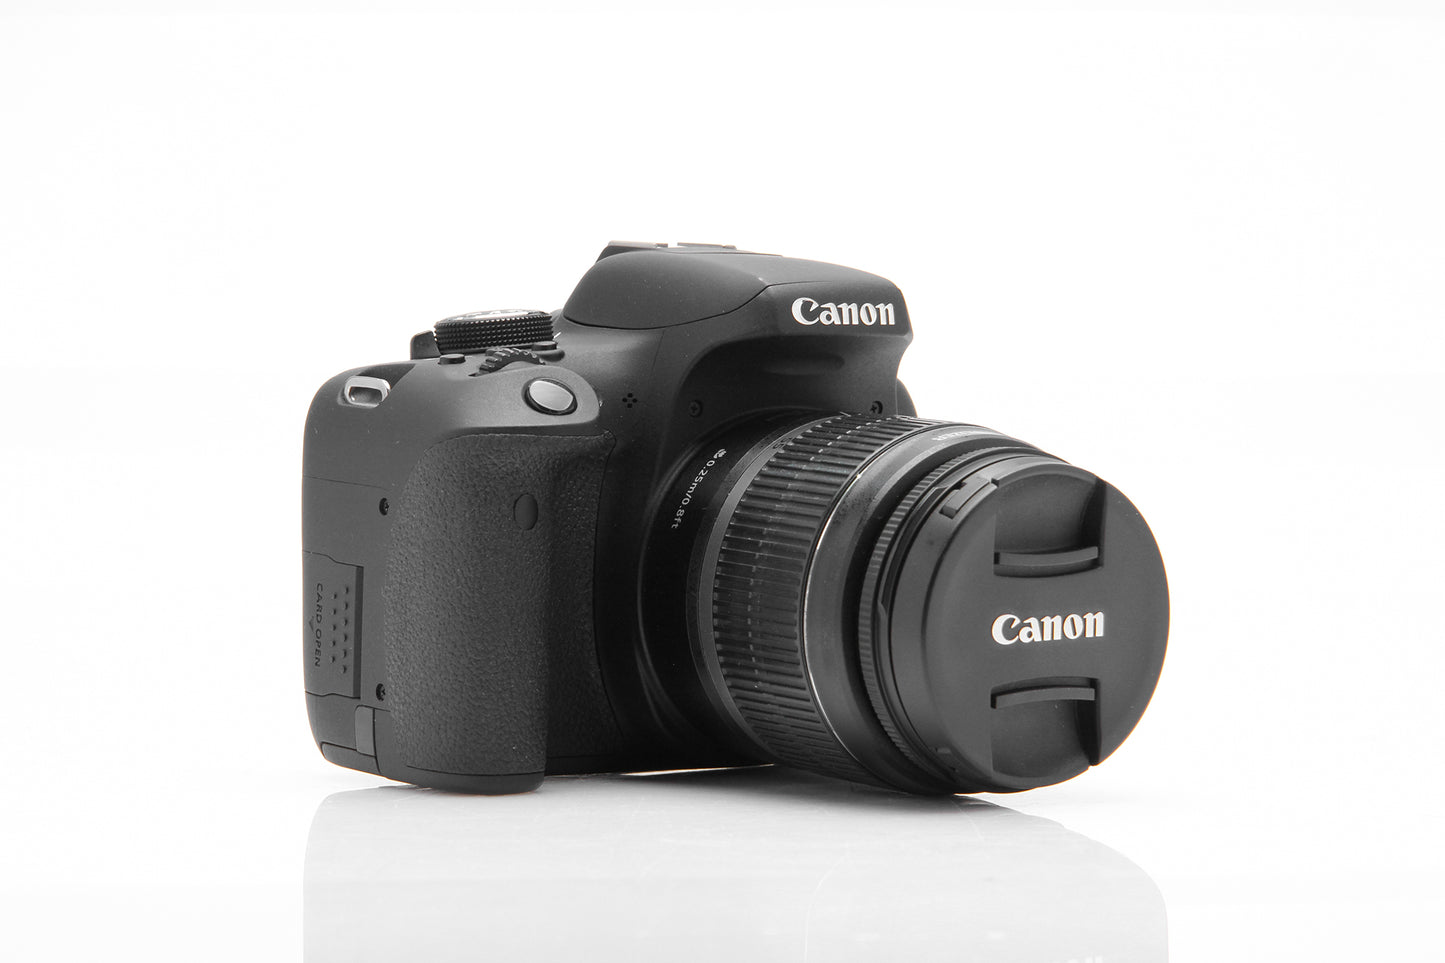 Used Canon 750D 24.2 MP Camera with 18-55mm Lens